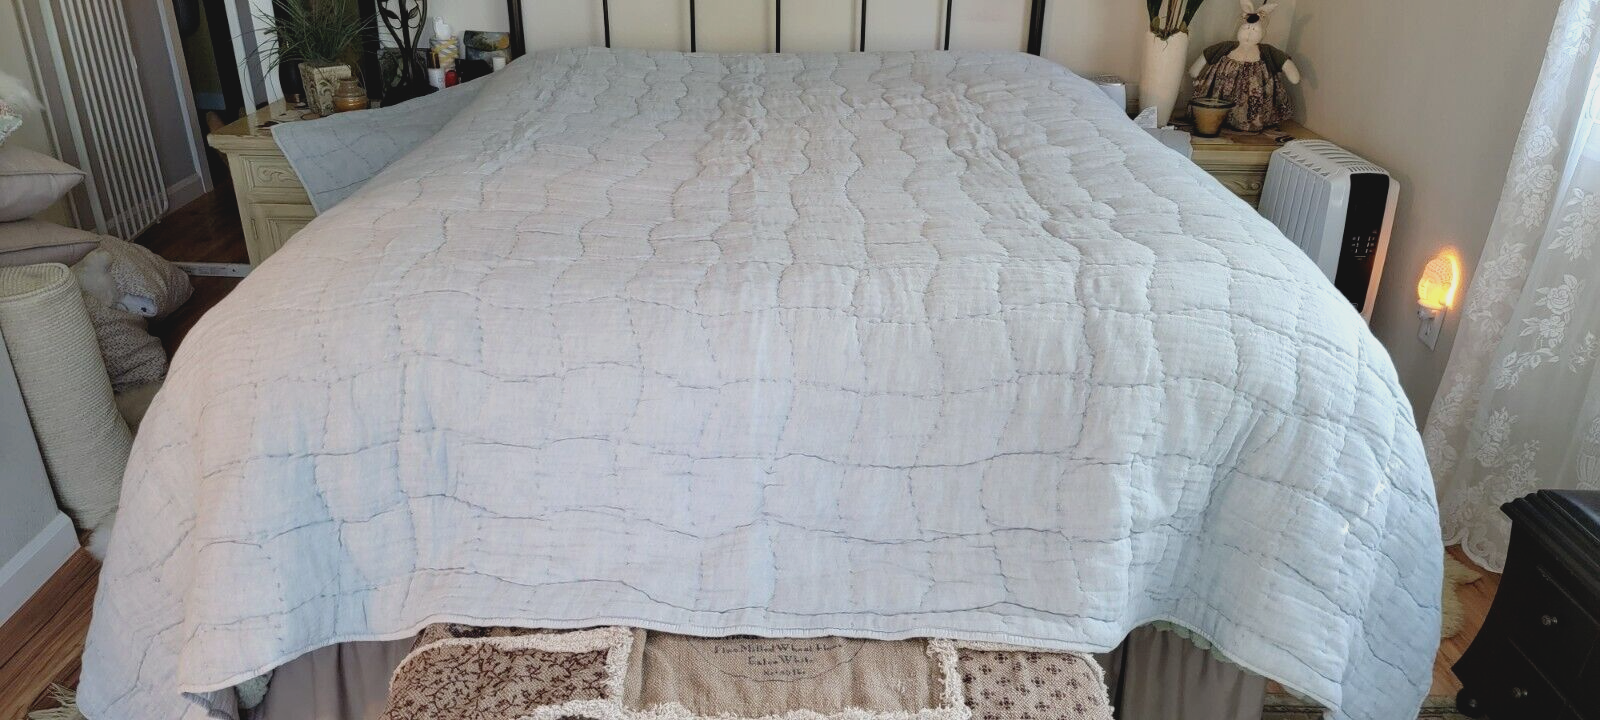 Primary image for Pottery Barn CLOUD LINEN HANDCRAFTED Quilt CHAMBRAY CAL/KING NWOT  #Q42